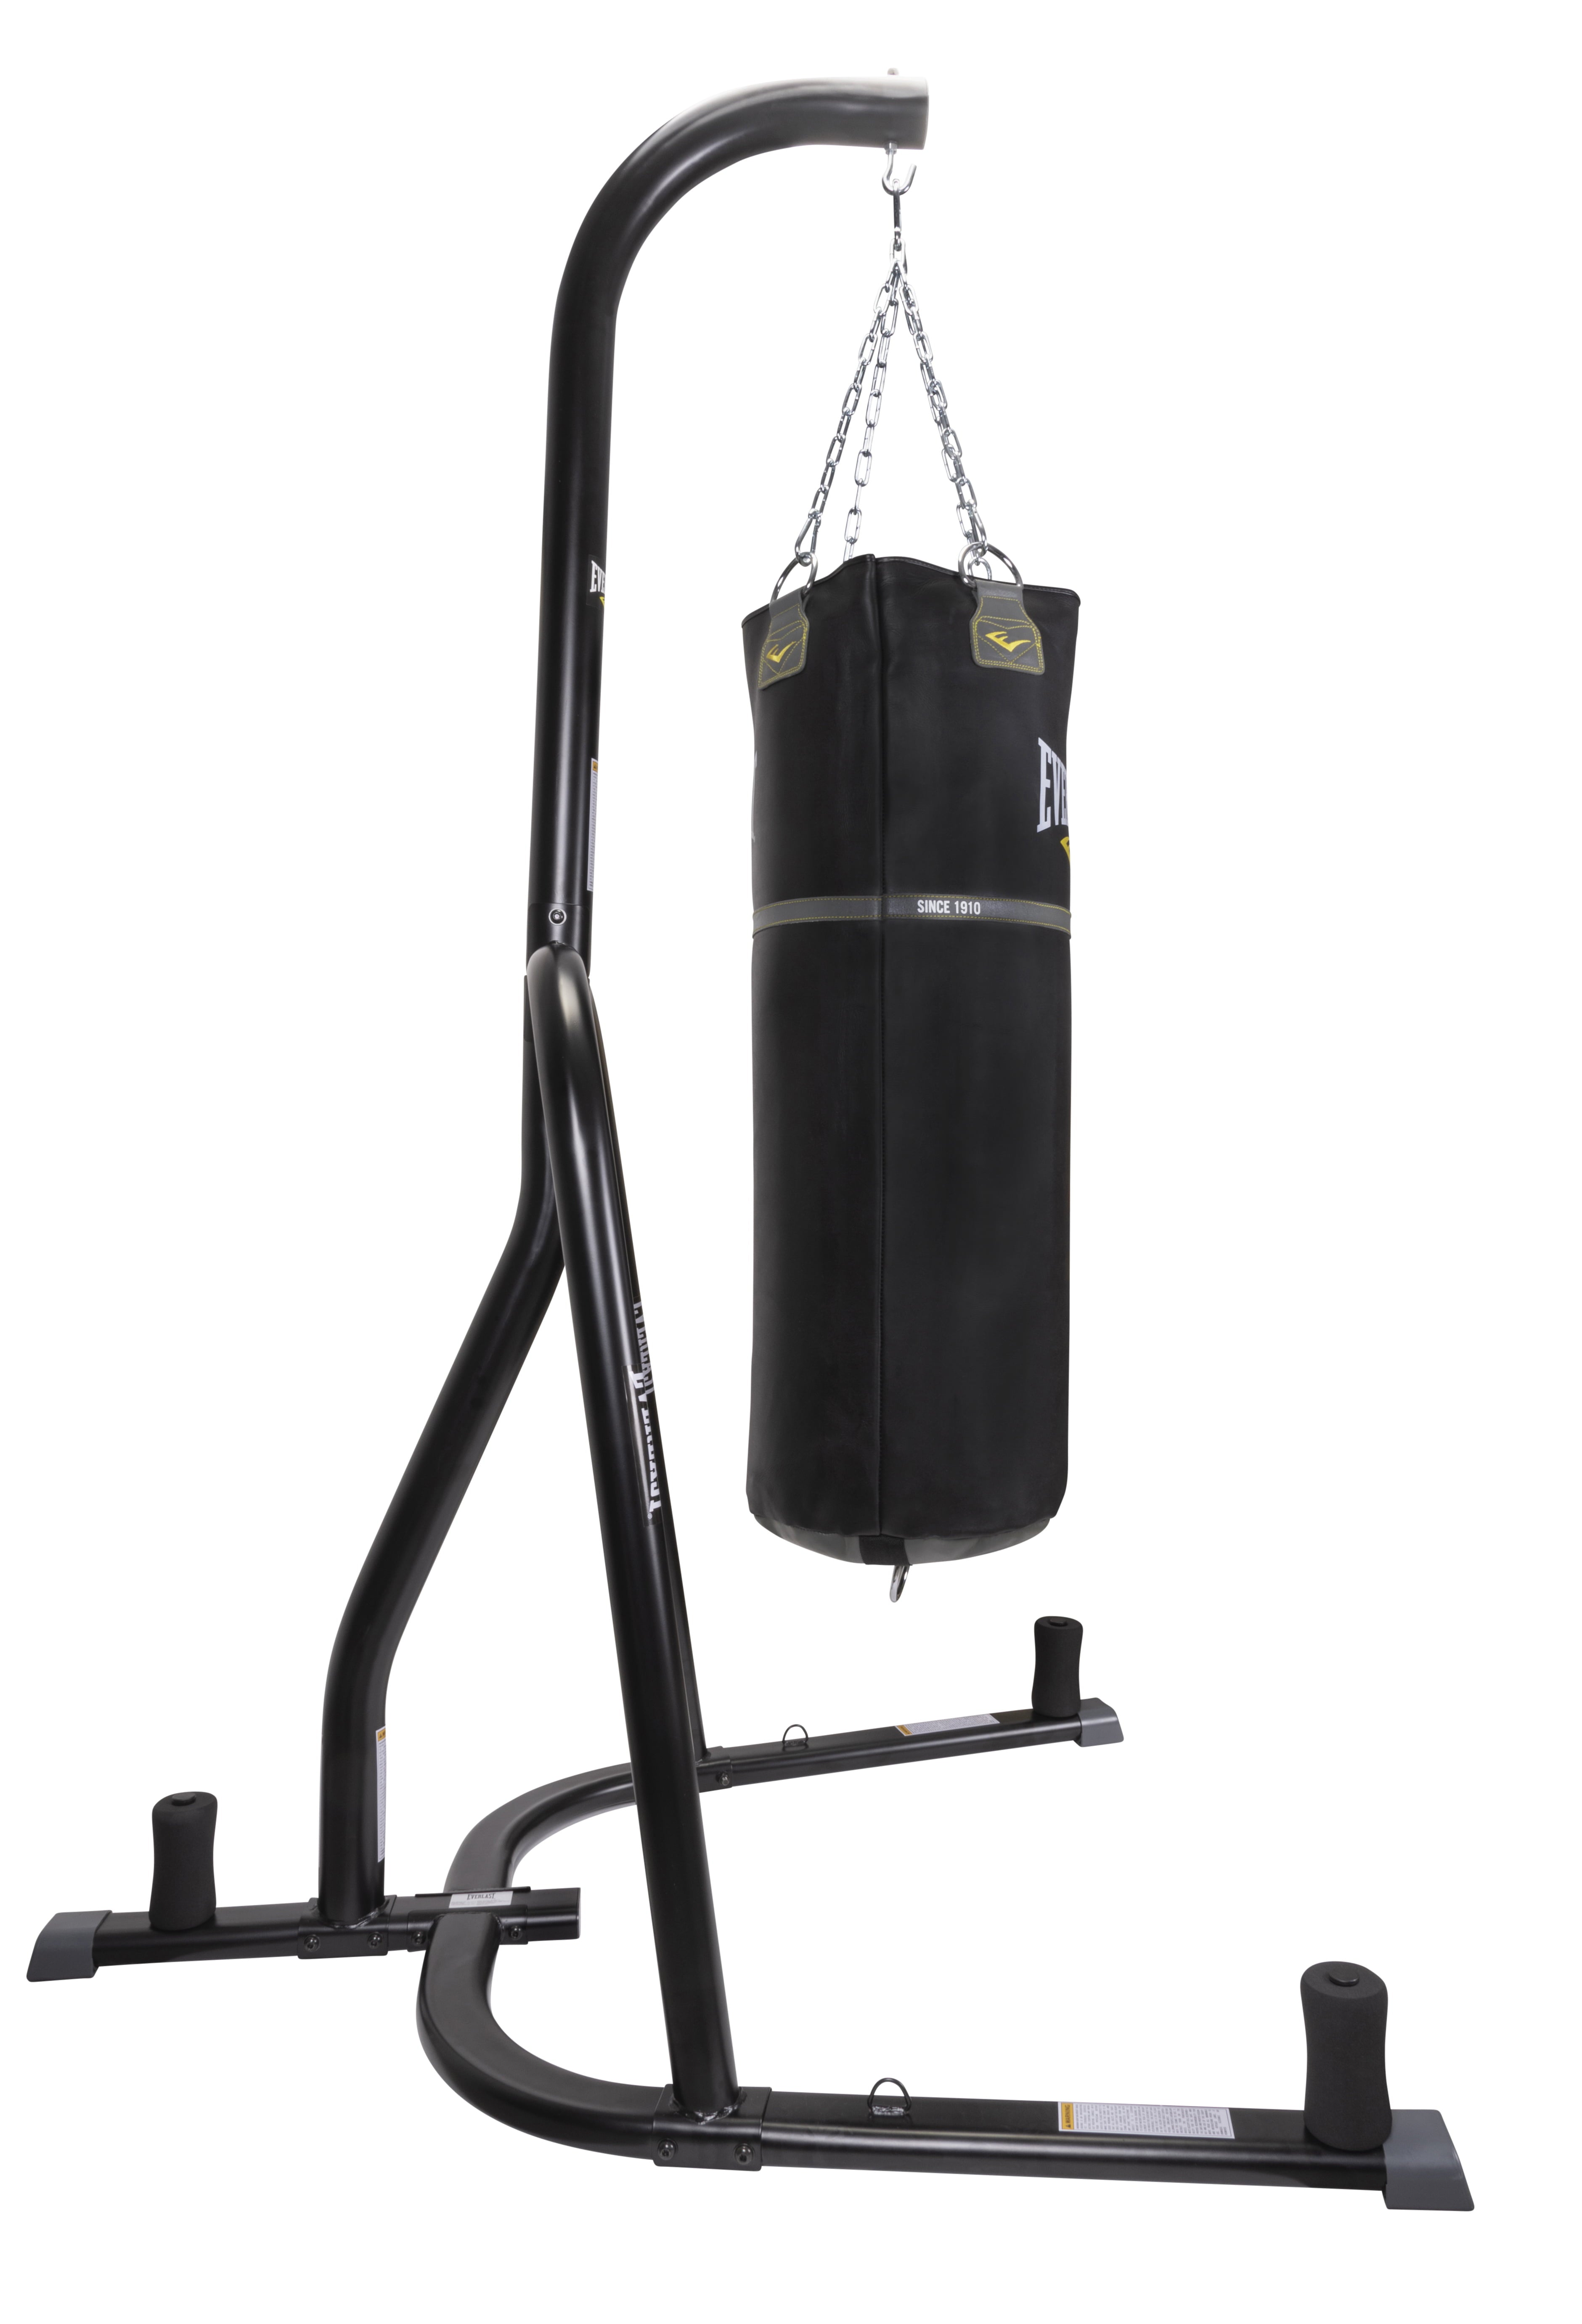 Everlast Steel Heavy Punching Bag Stand Workout Equipment for Kickboxing, Boxing, and MMA Training with 3 Plate Pegs and 100 Pou - 4812BDTC